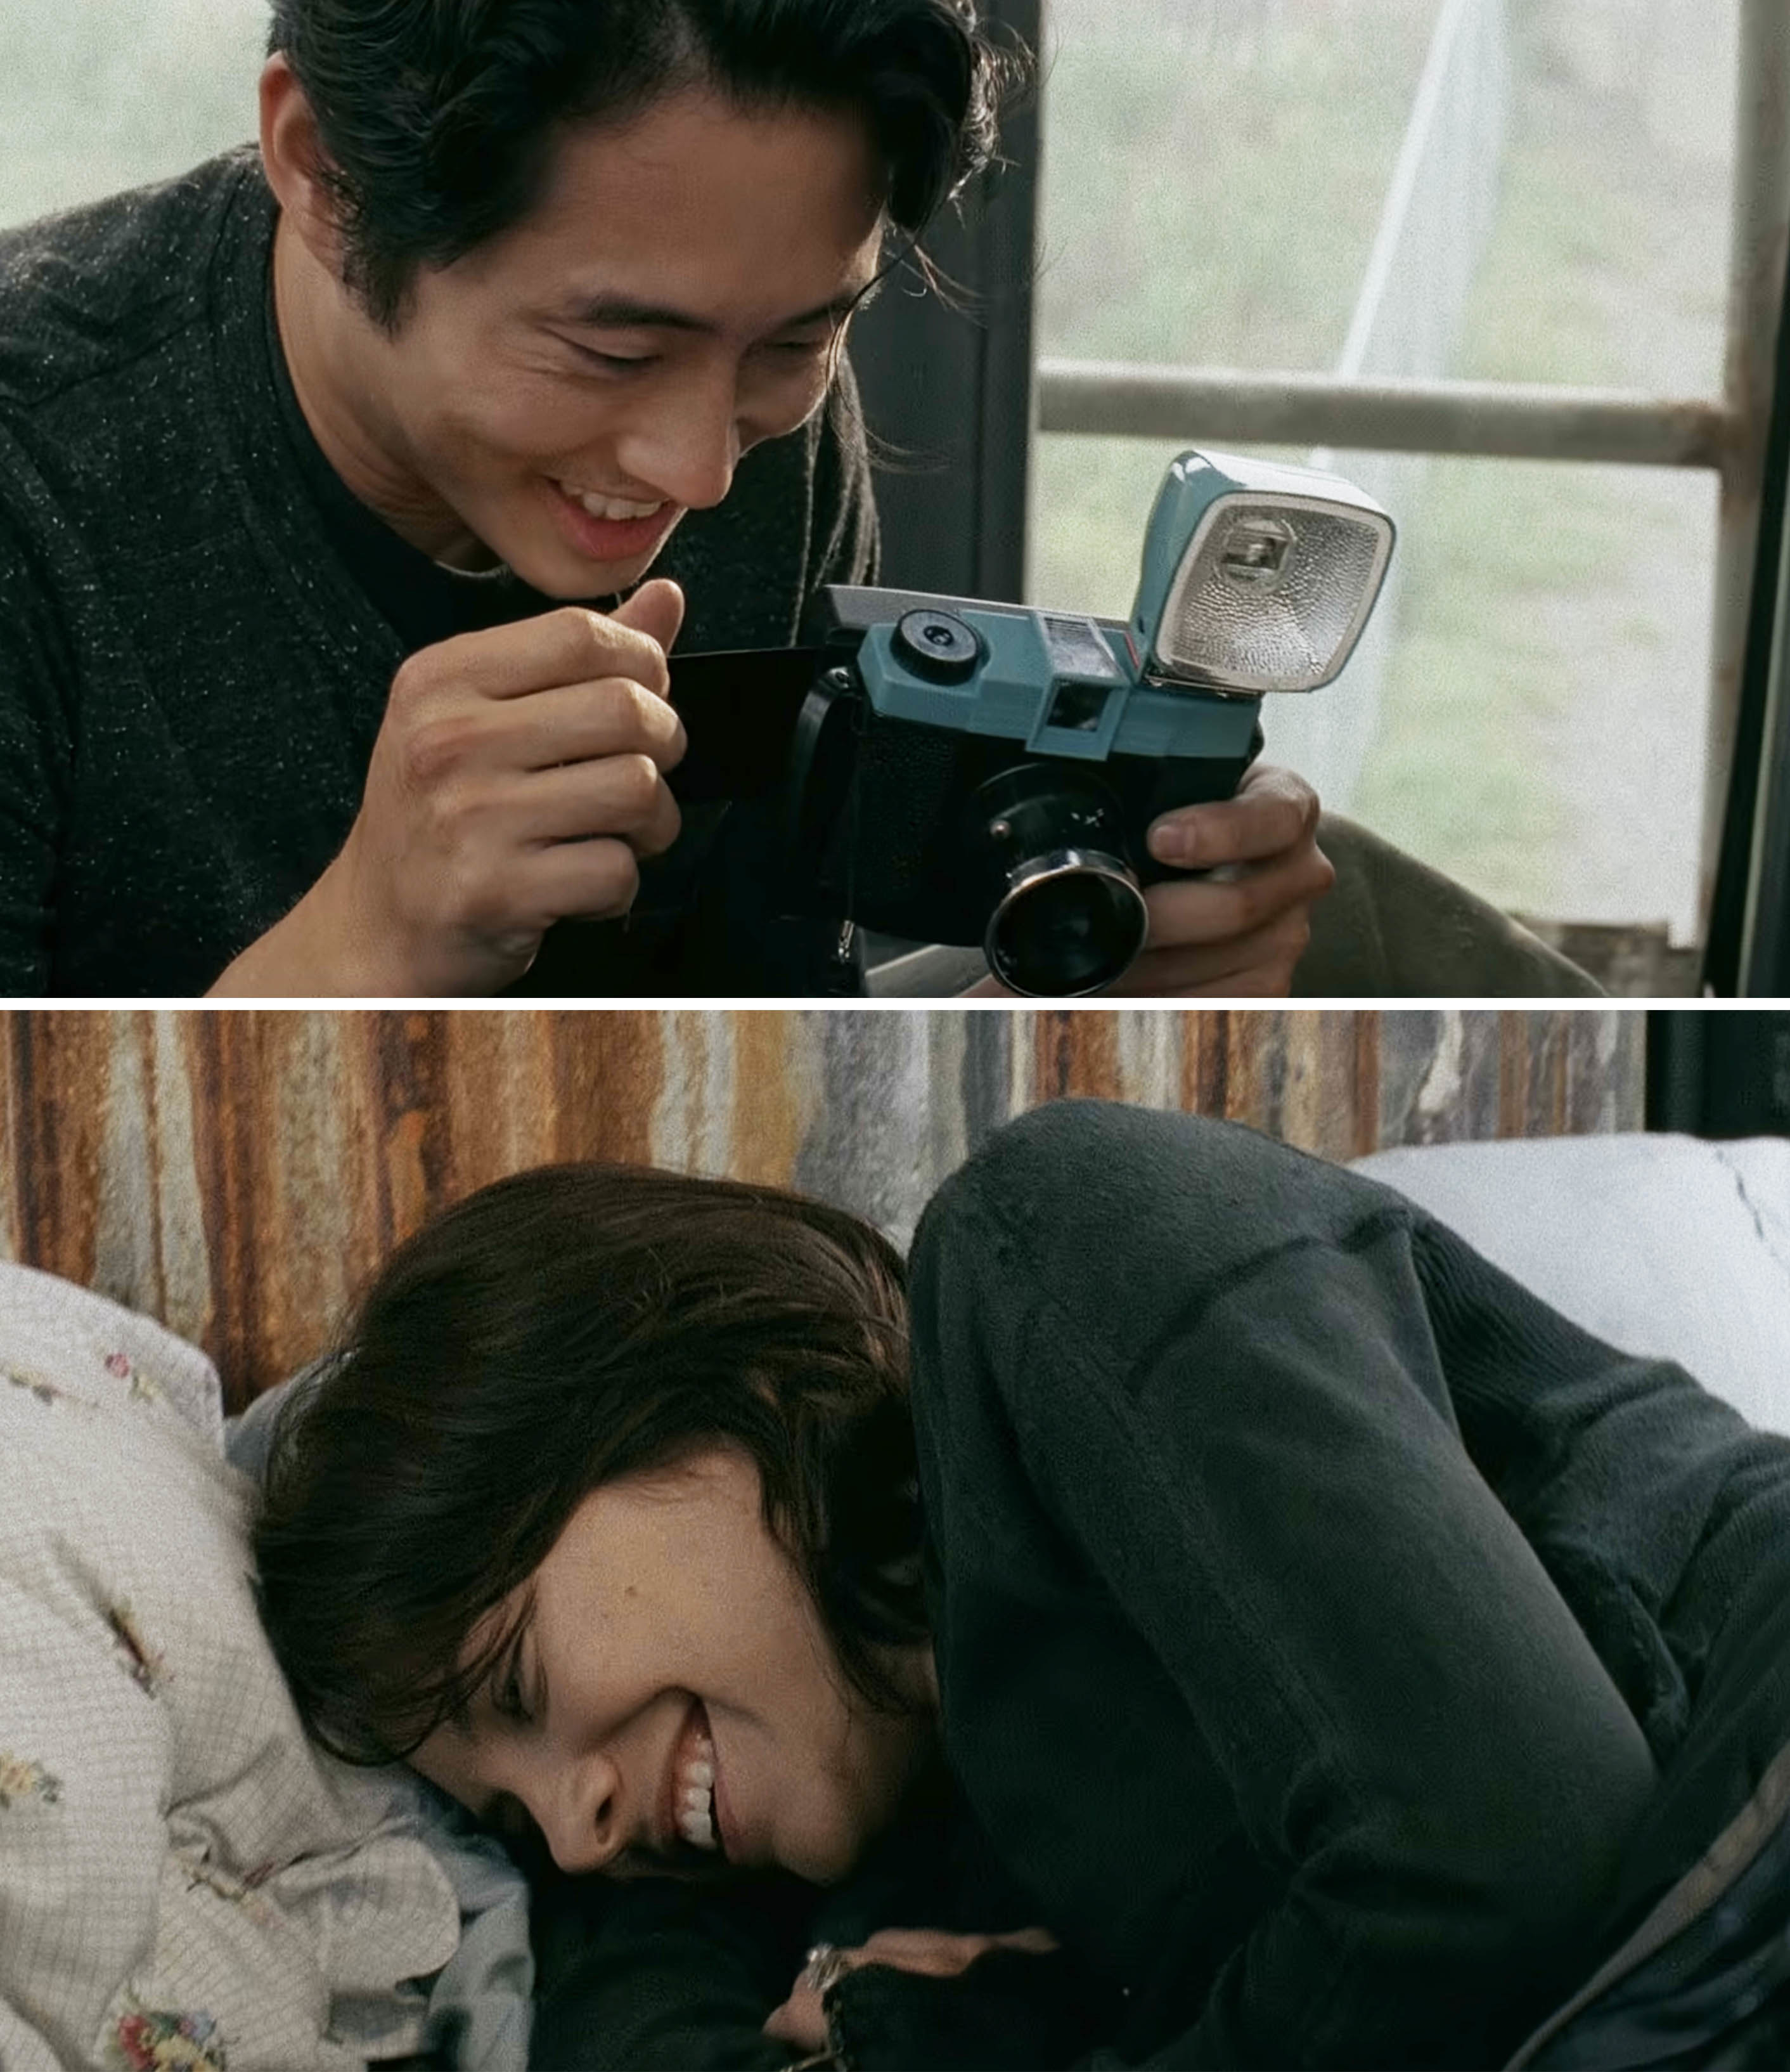 glenn taking photos of maggie laughing in bed